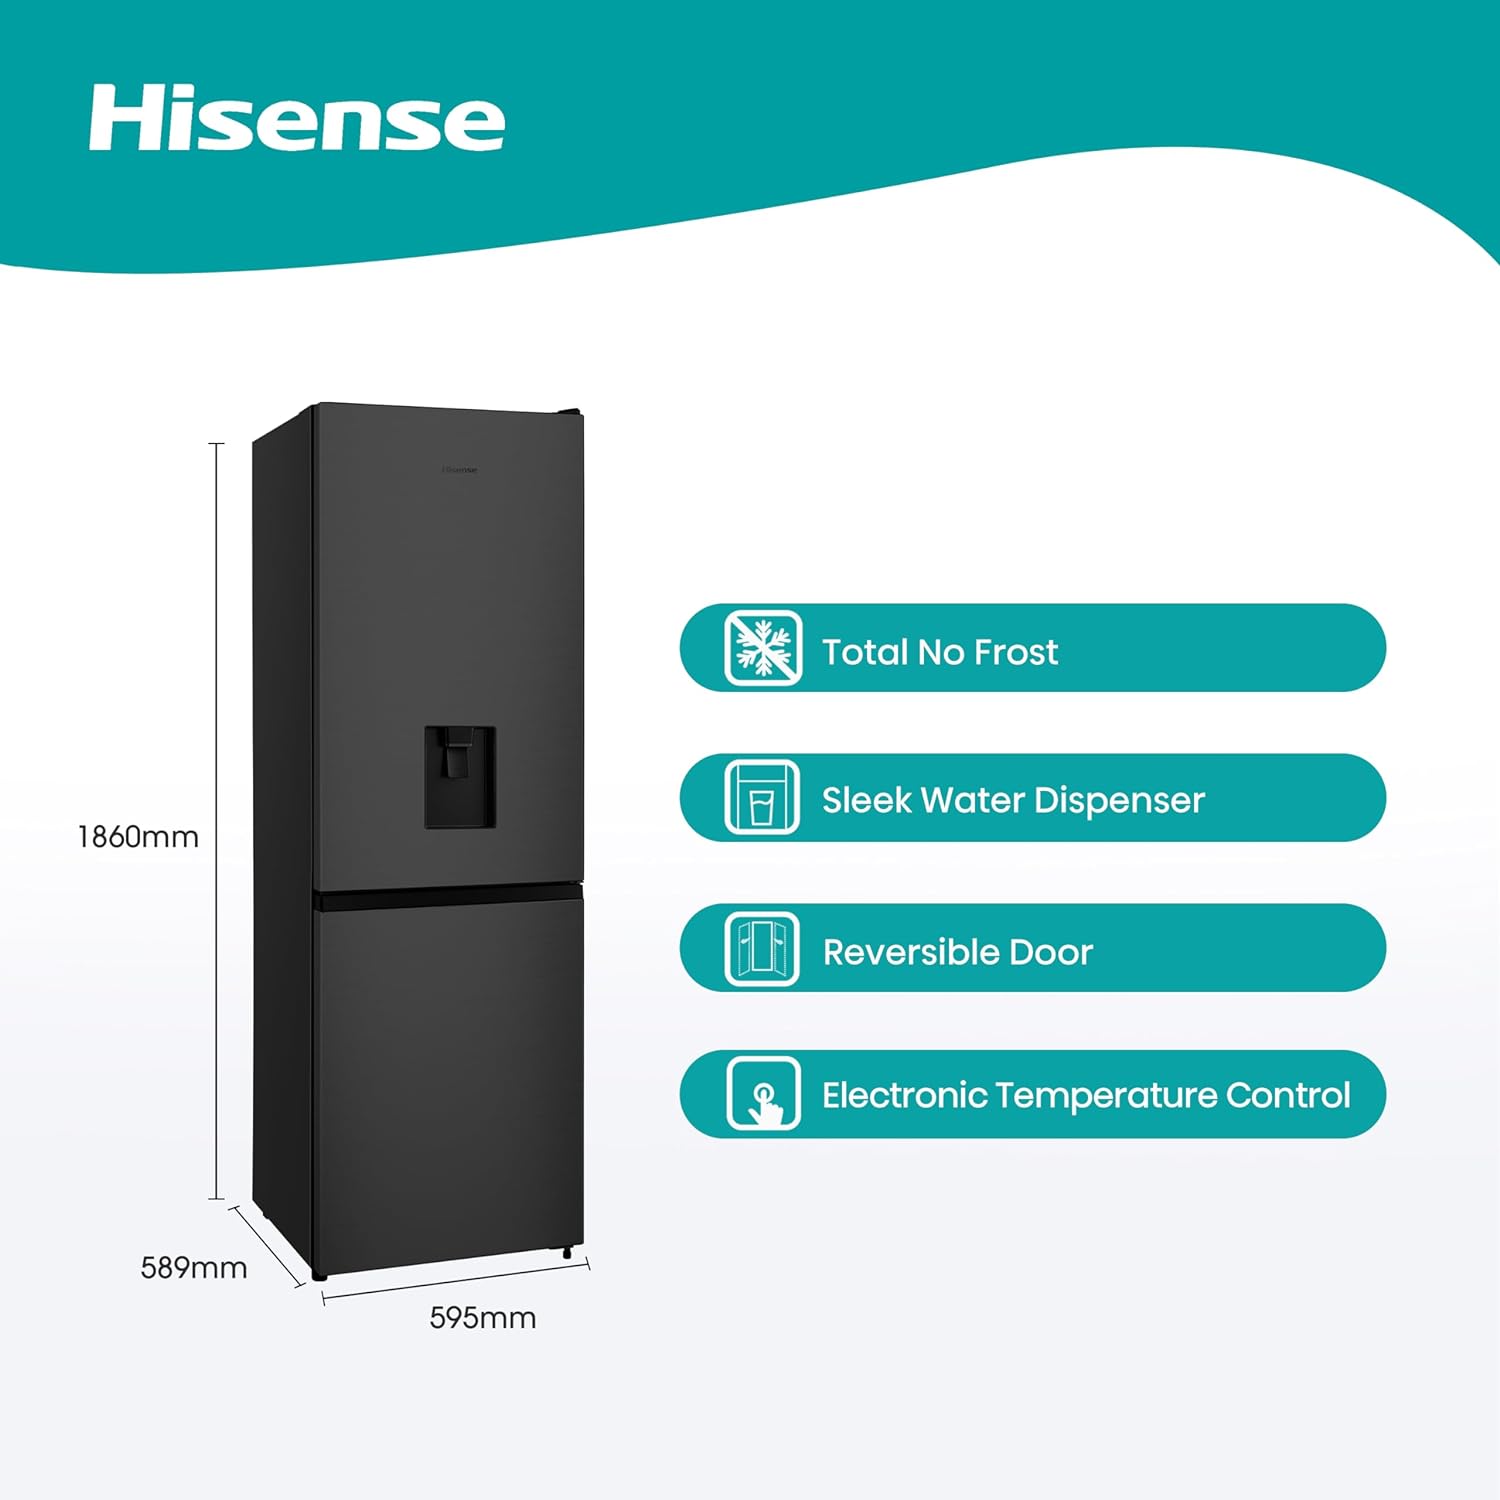 Hisense RB390N4WBE 60cm Freestanding 60/40 Fridge Freezer - 304 litre capacity - Total No Frost - Non - plumbed Water Dispenser - Black - F Rated, H186 x W59.5 x D59.0   Import  Single ASIN  Import  Multiple ASIN ×Product customization Gener - Amazing Gadgets Outlet